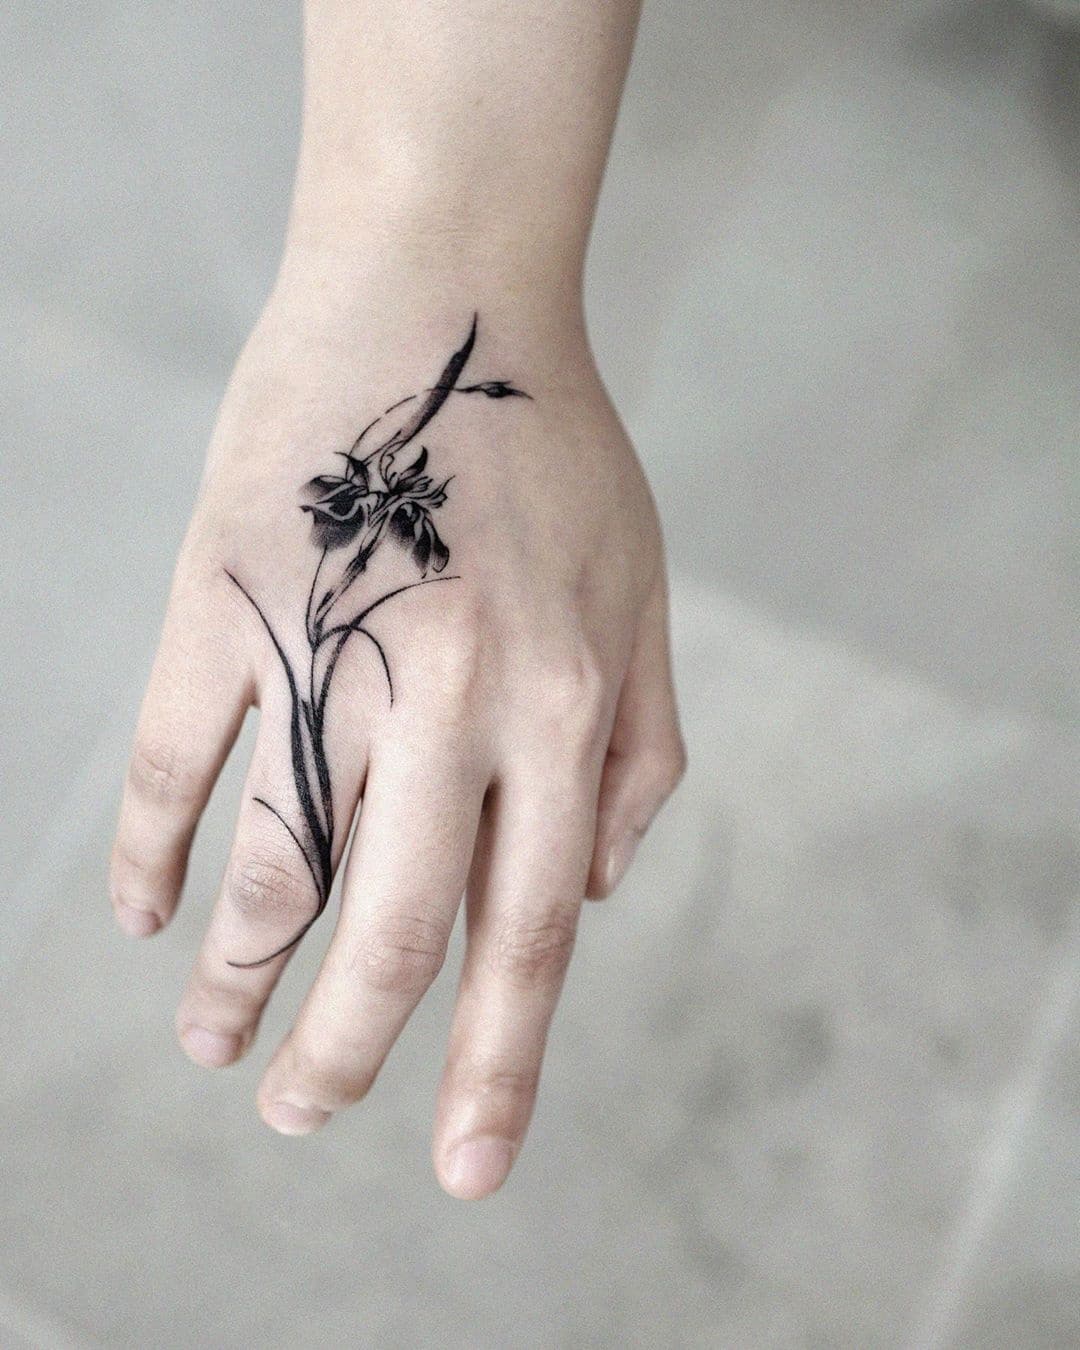 Iris tattoos: 10 Best Designs and Meanings